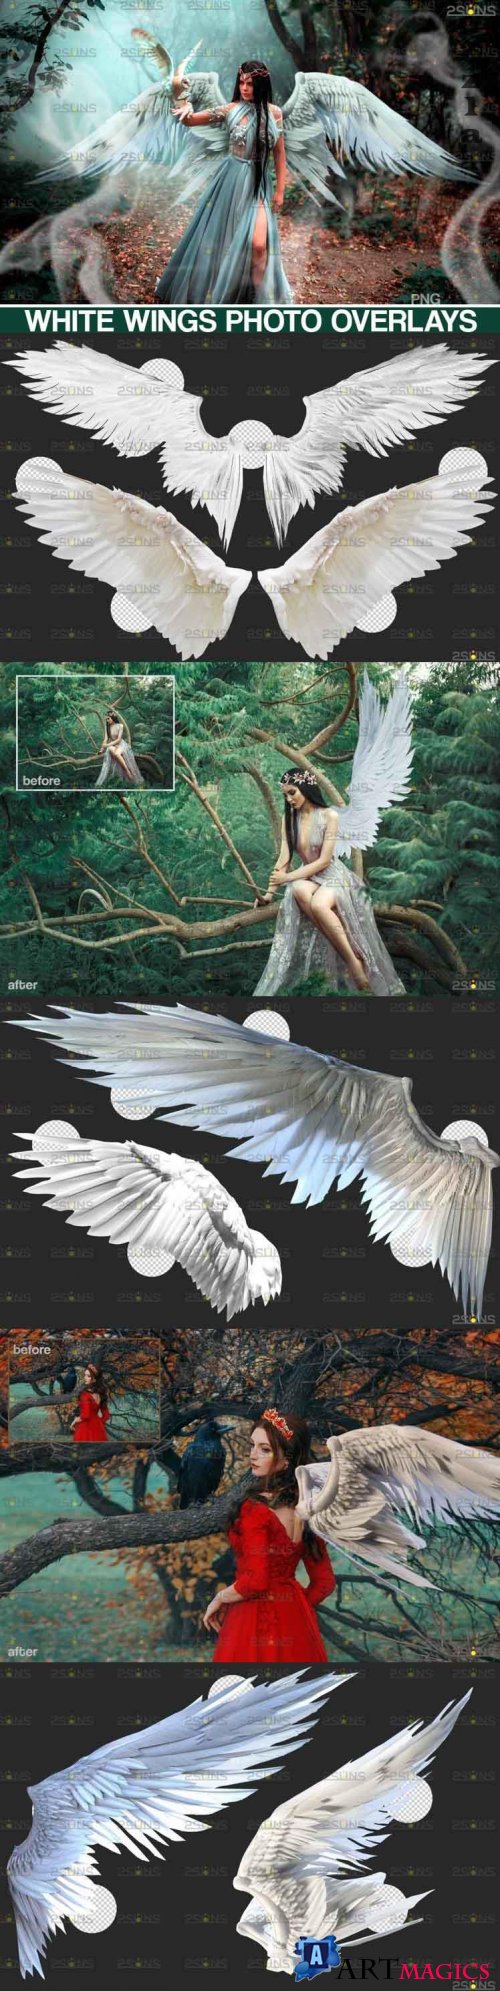 Realistic White Angel Wings Photoshop Overlays  - 644525